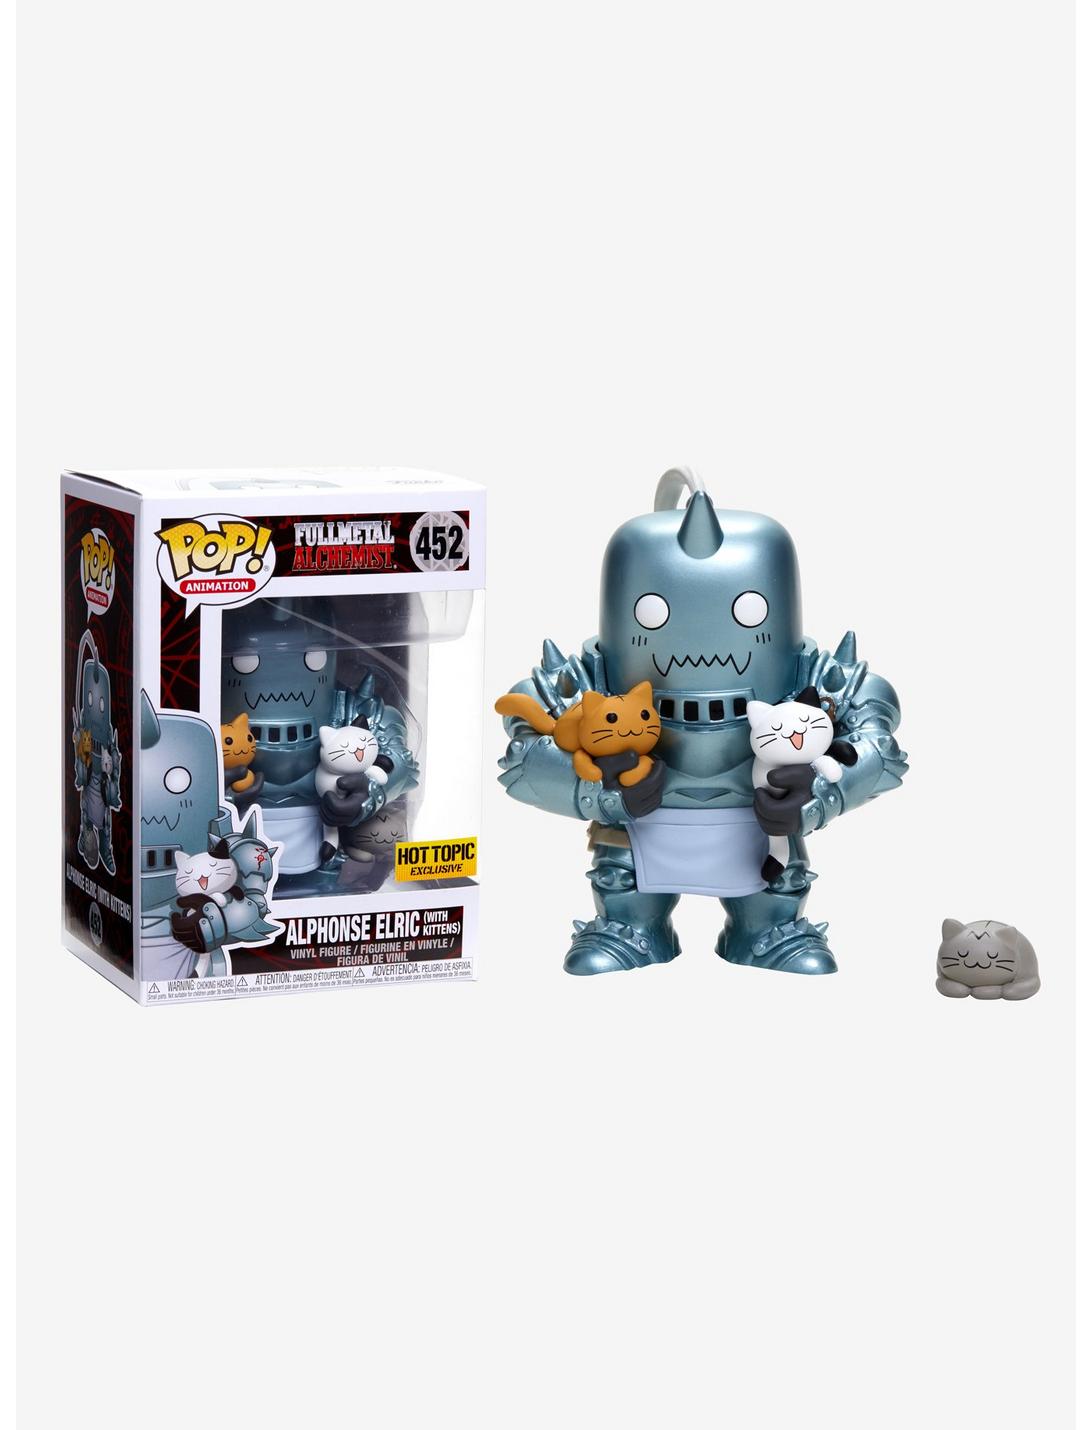 Funko POP! Animation Full Metal Alchemist Alphonse Elric (with Kittens) Hot Topic Exclusive